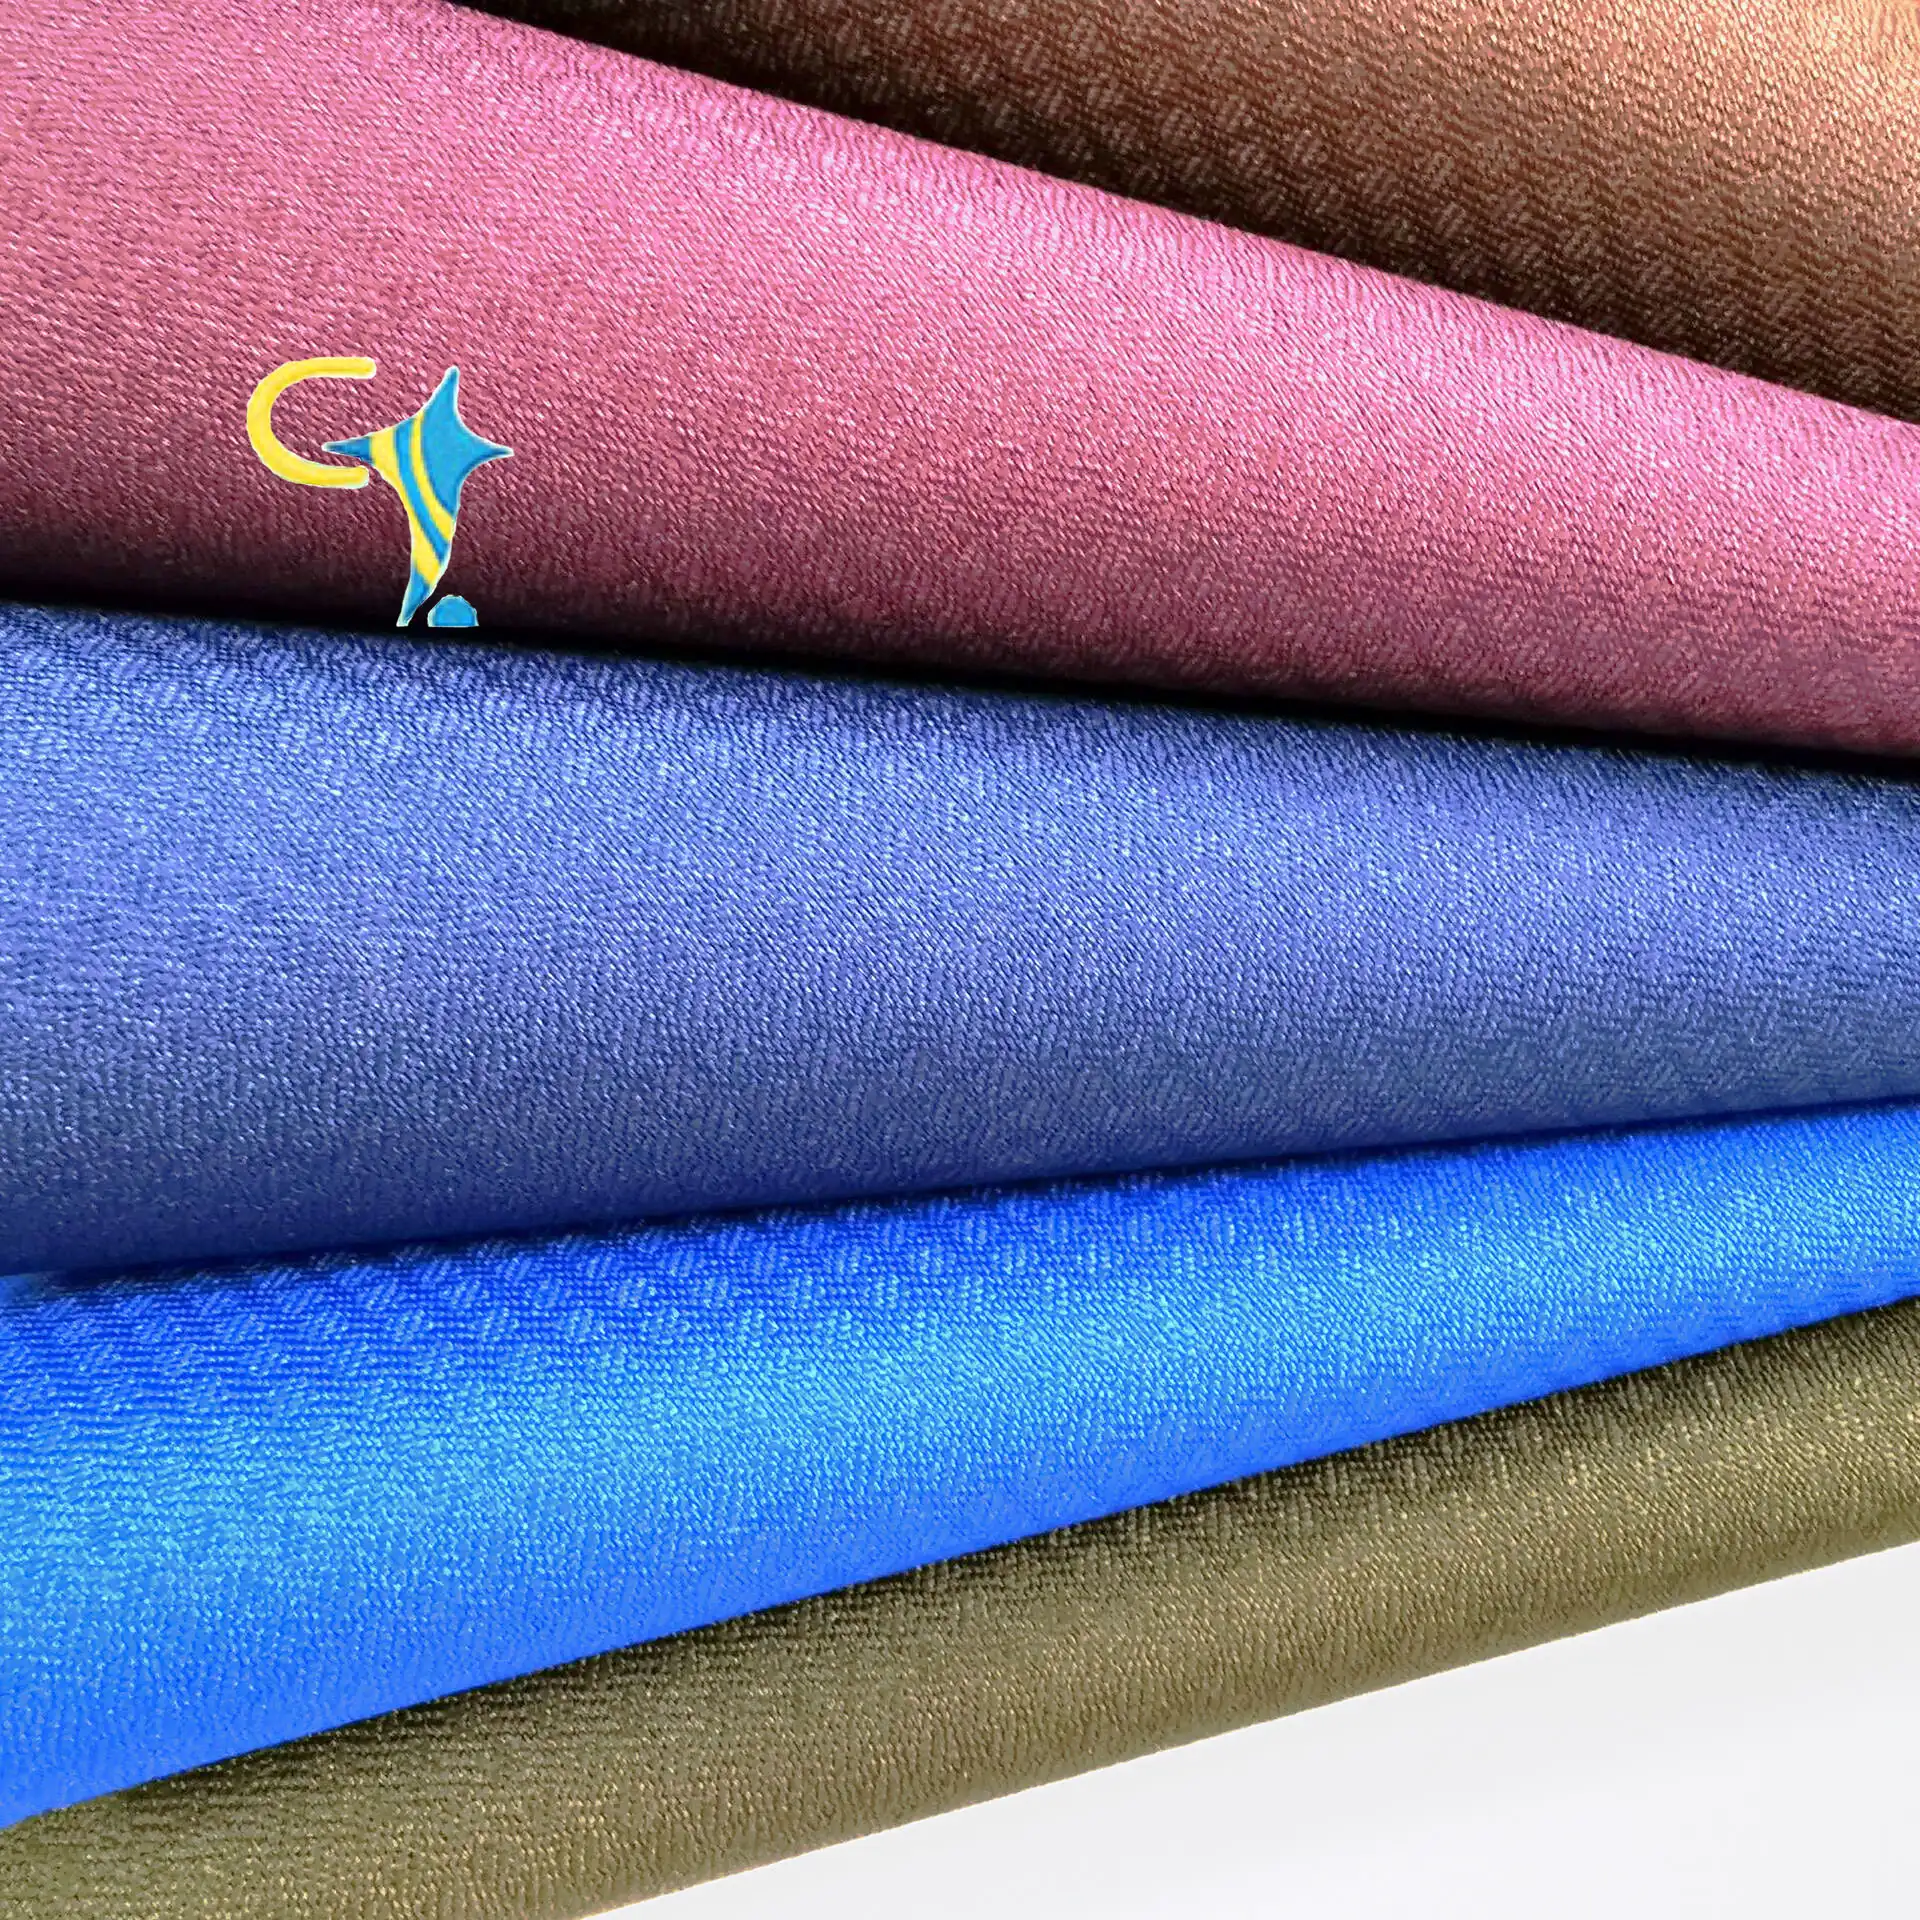 Fabric Oxford Ripstop Fabrics China Fabric 100% Polyester Oxford Fabric 300D Invisibility Ripstop With PVC PU COATED FABRICS